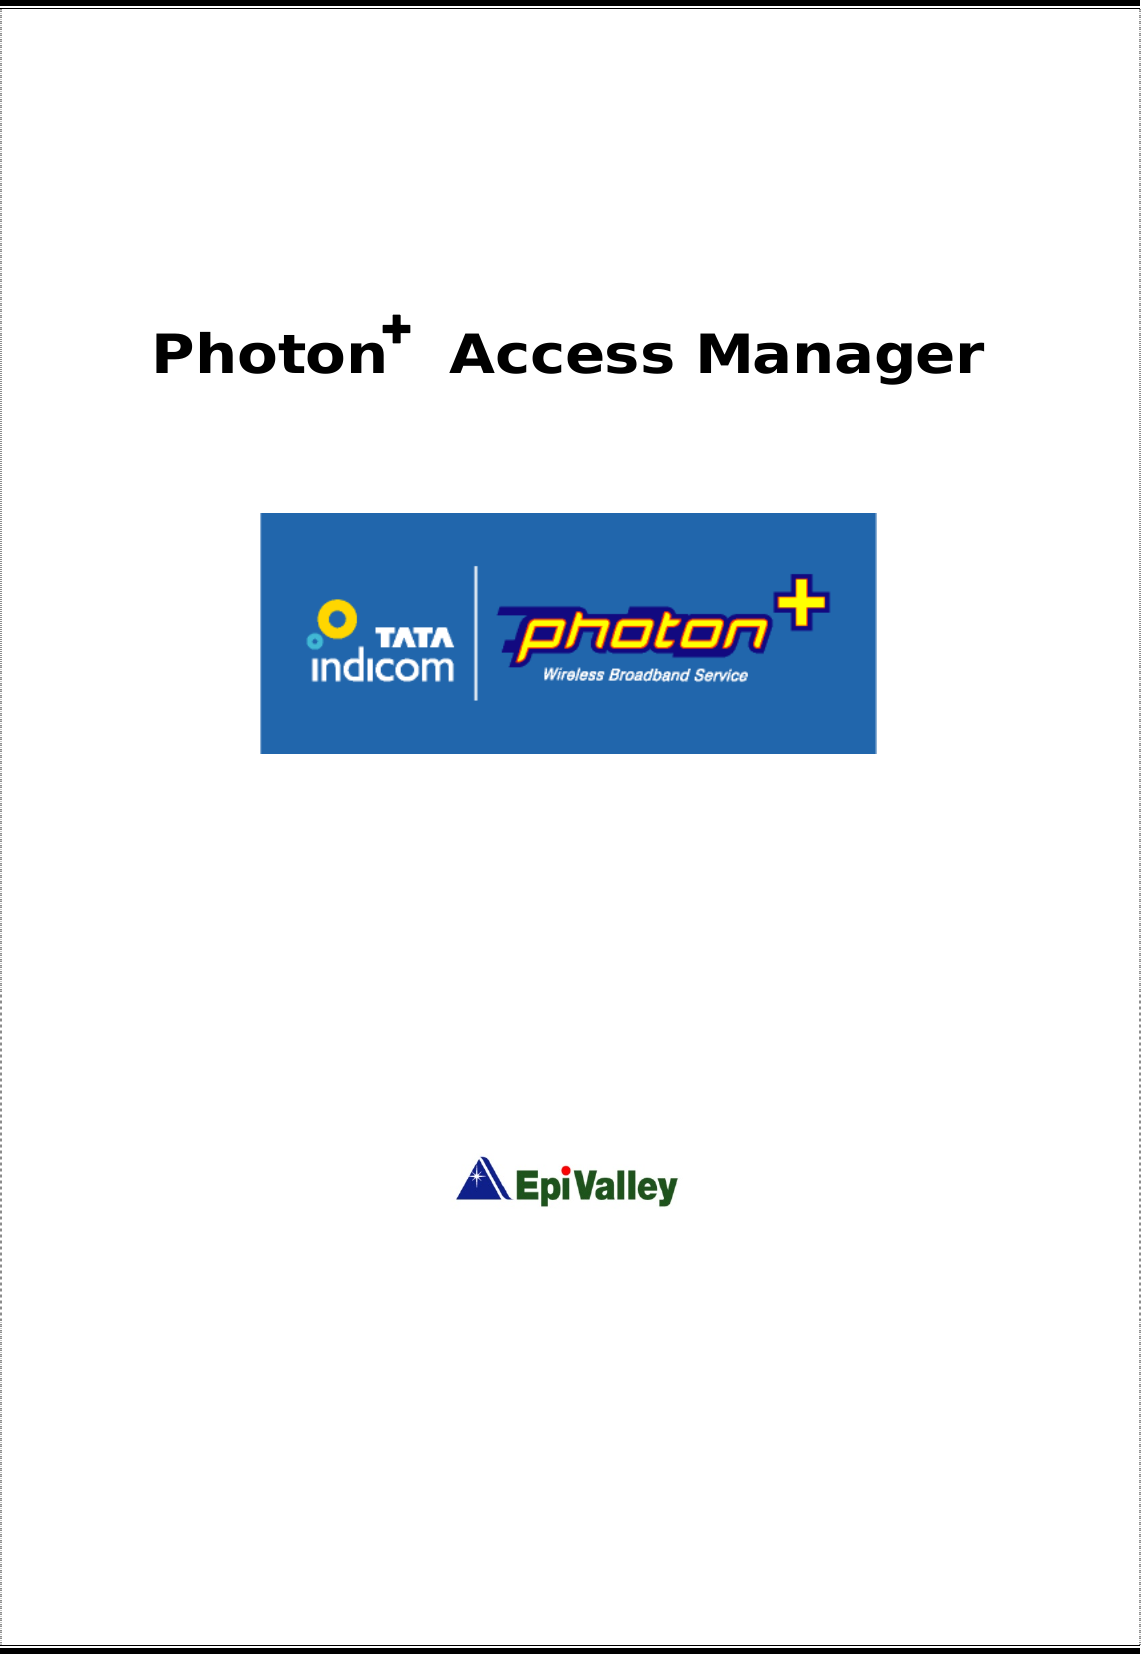      Photon  Access Manager                + 